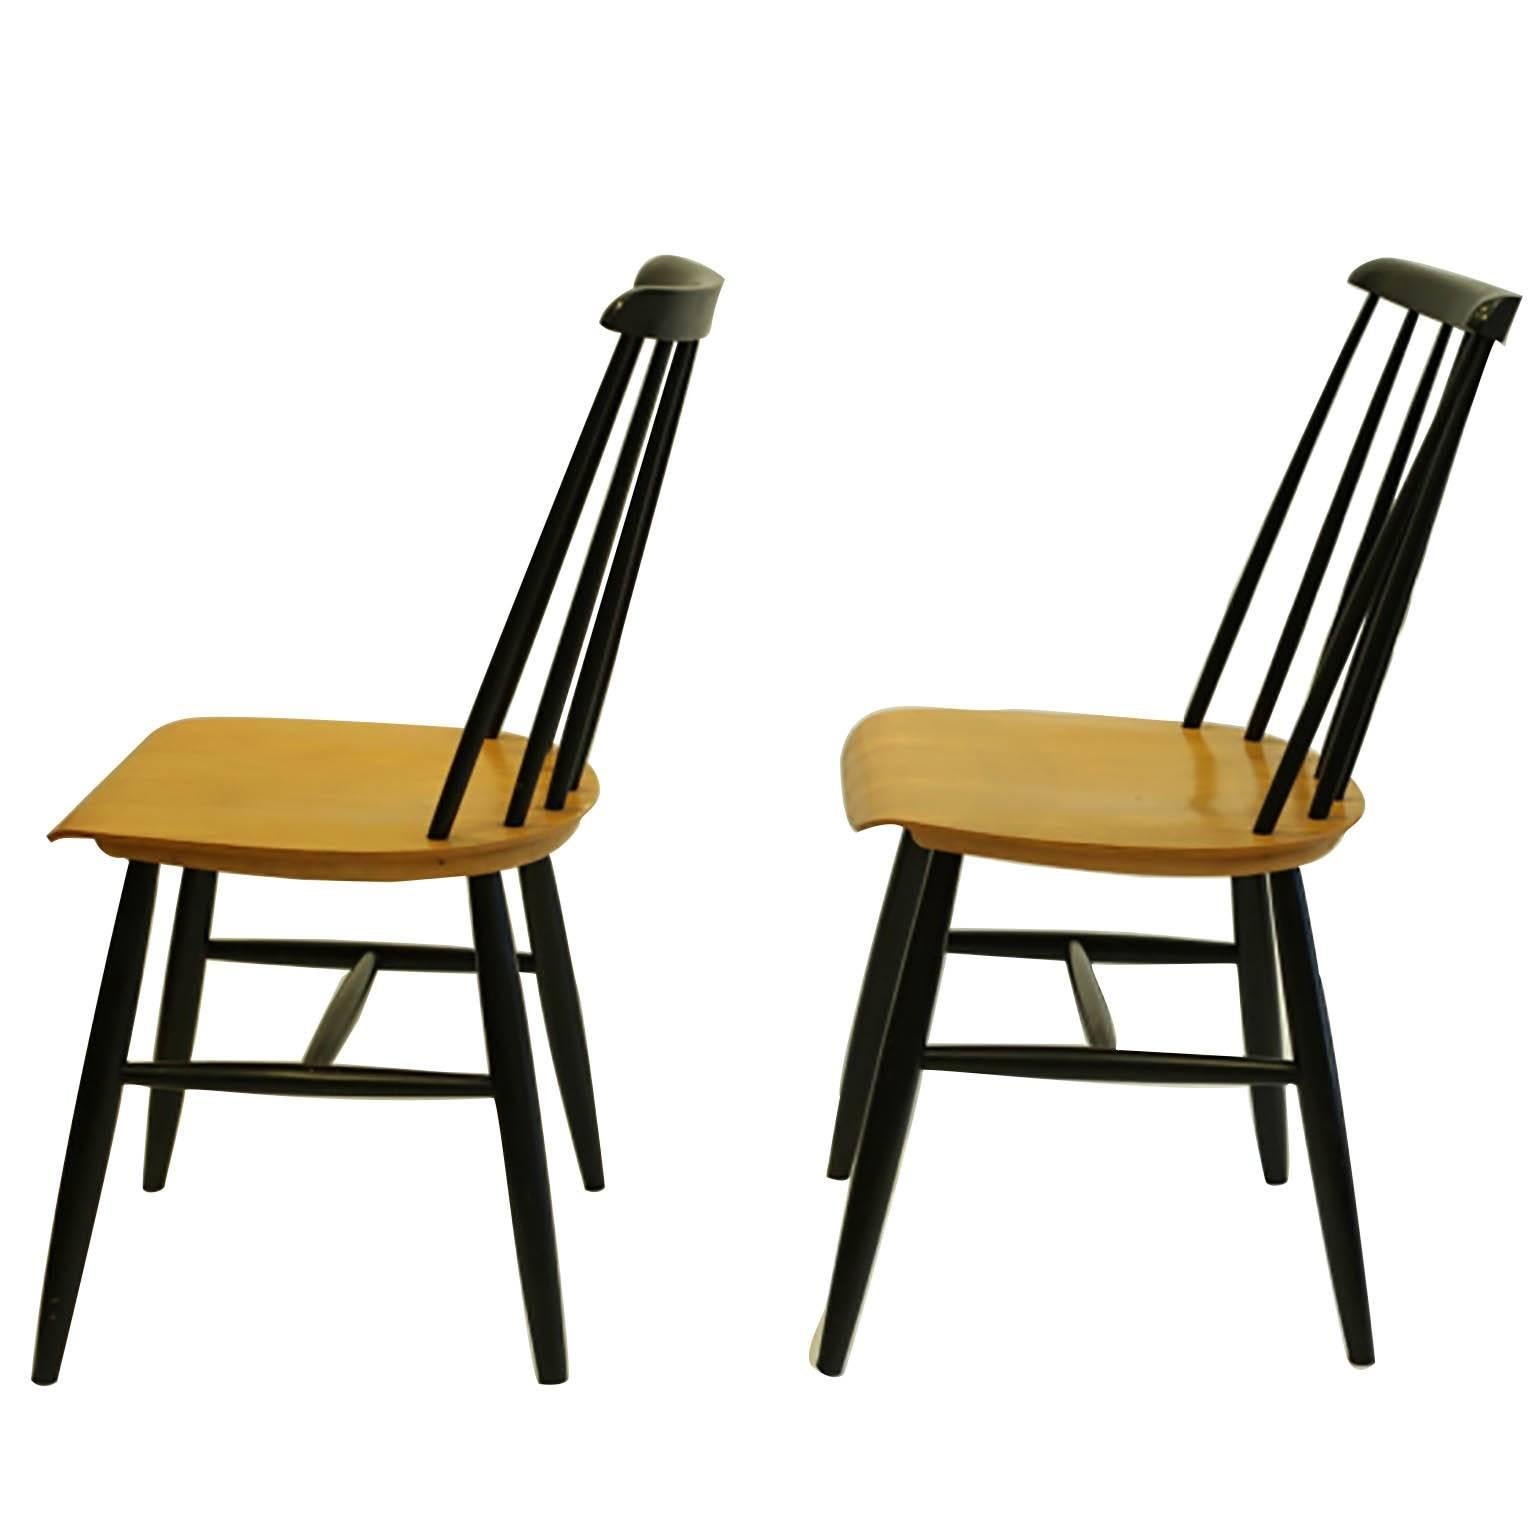 Price is per chair
May be sold separately 

Pair of teak and black lacquered dining chairs by Imari Tapiovaara. Made in Sweden.